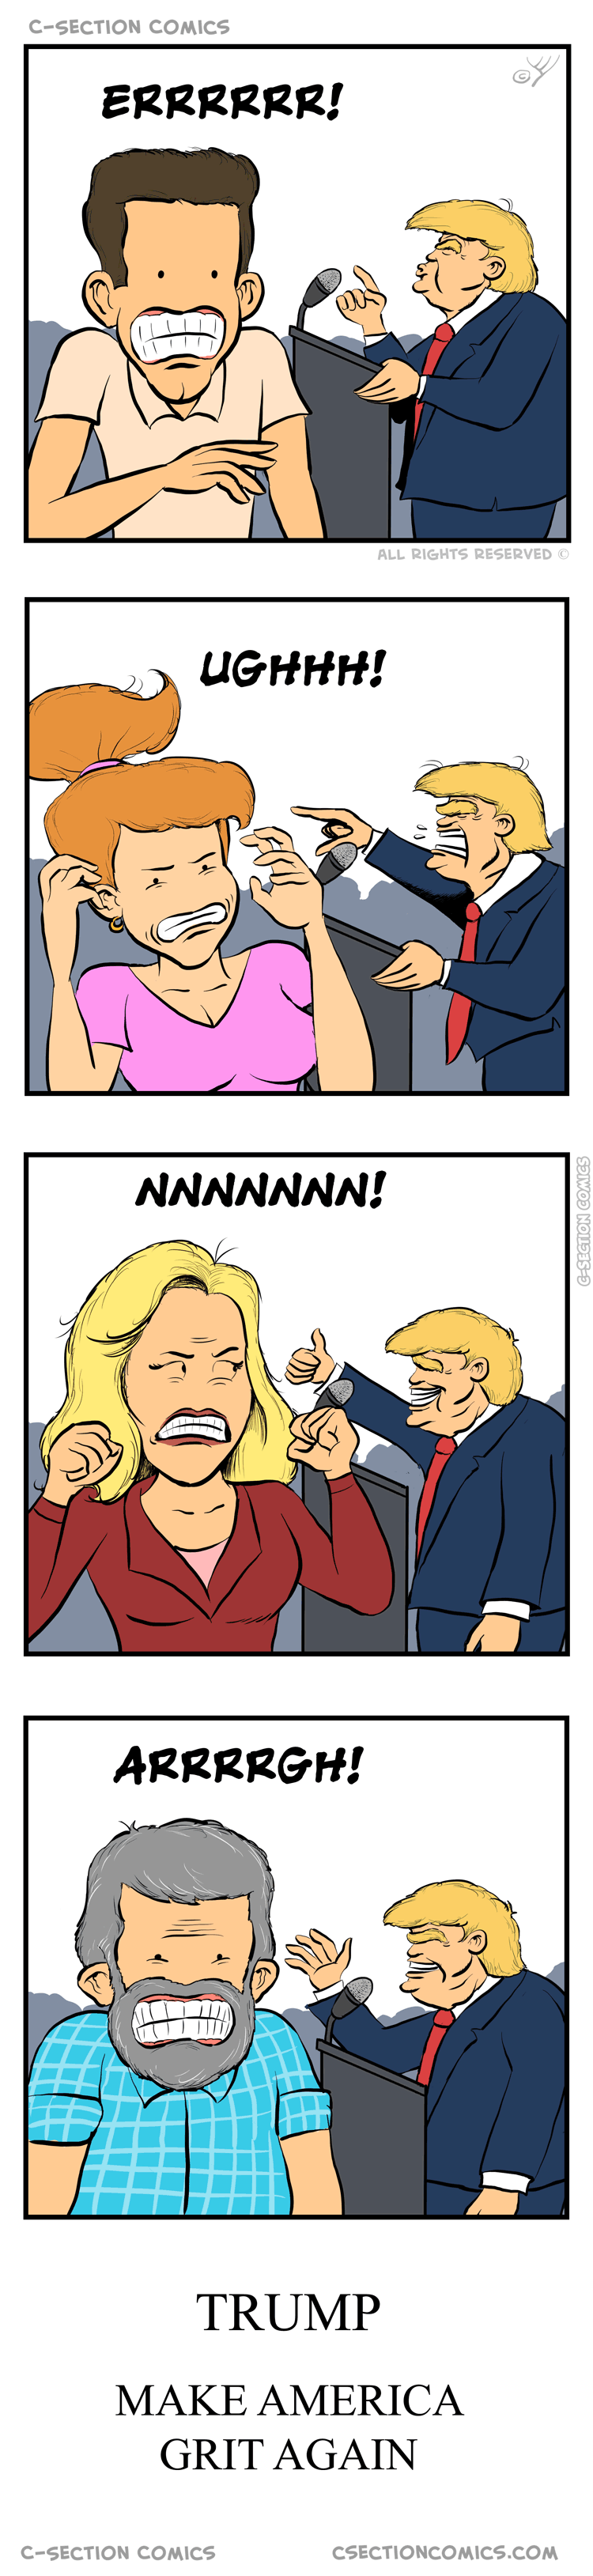 Make America Grit Again - by C-Section Comics